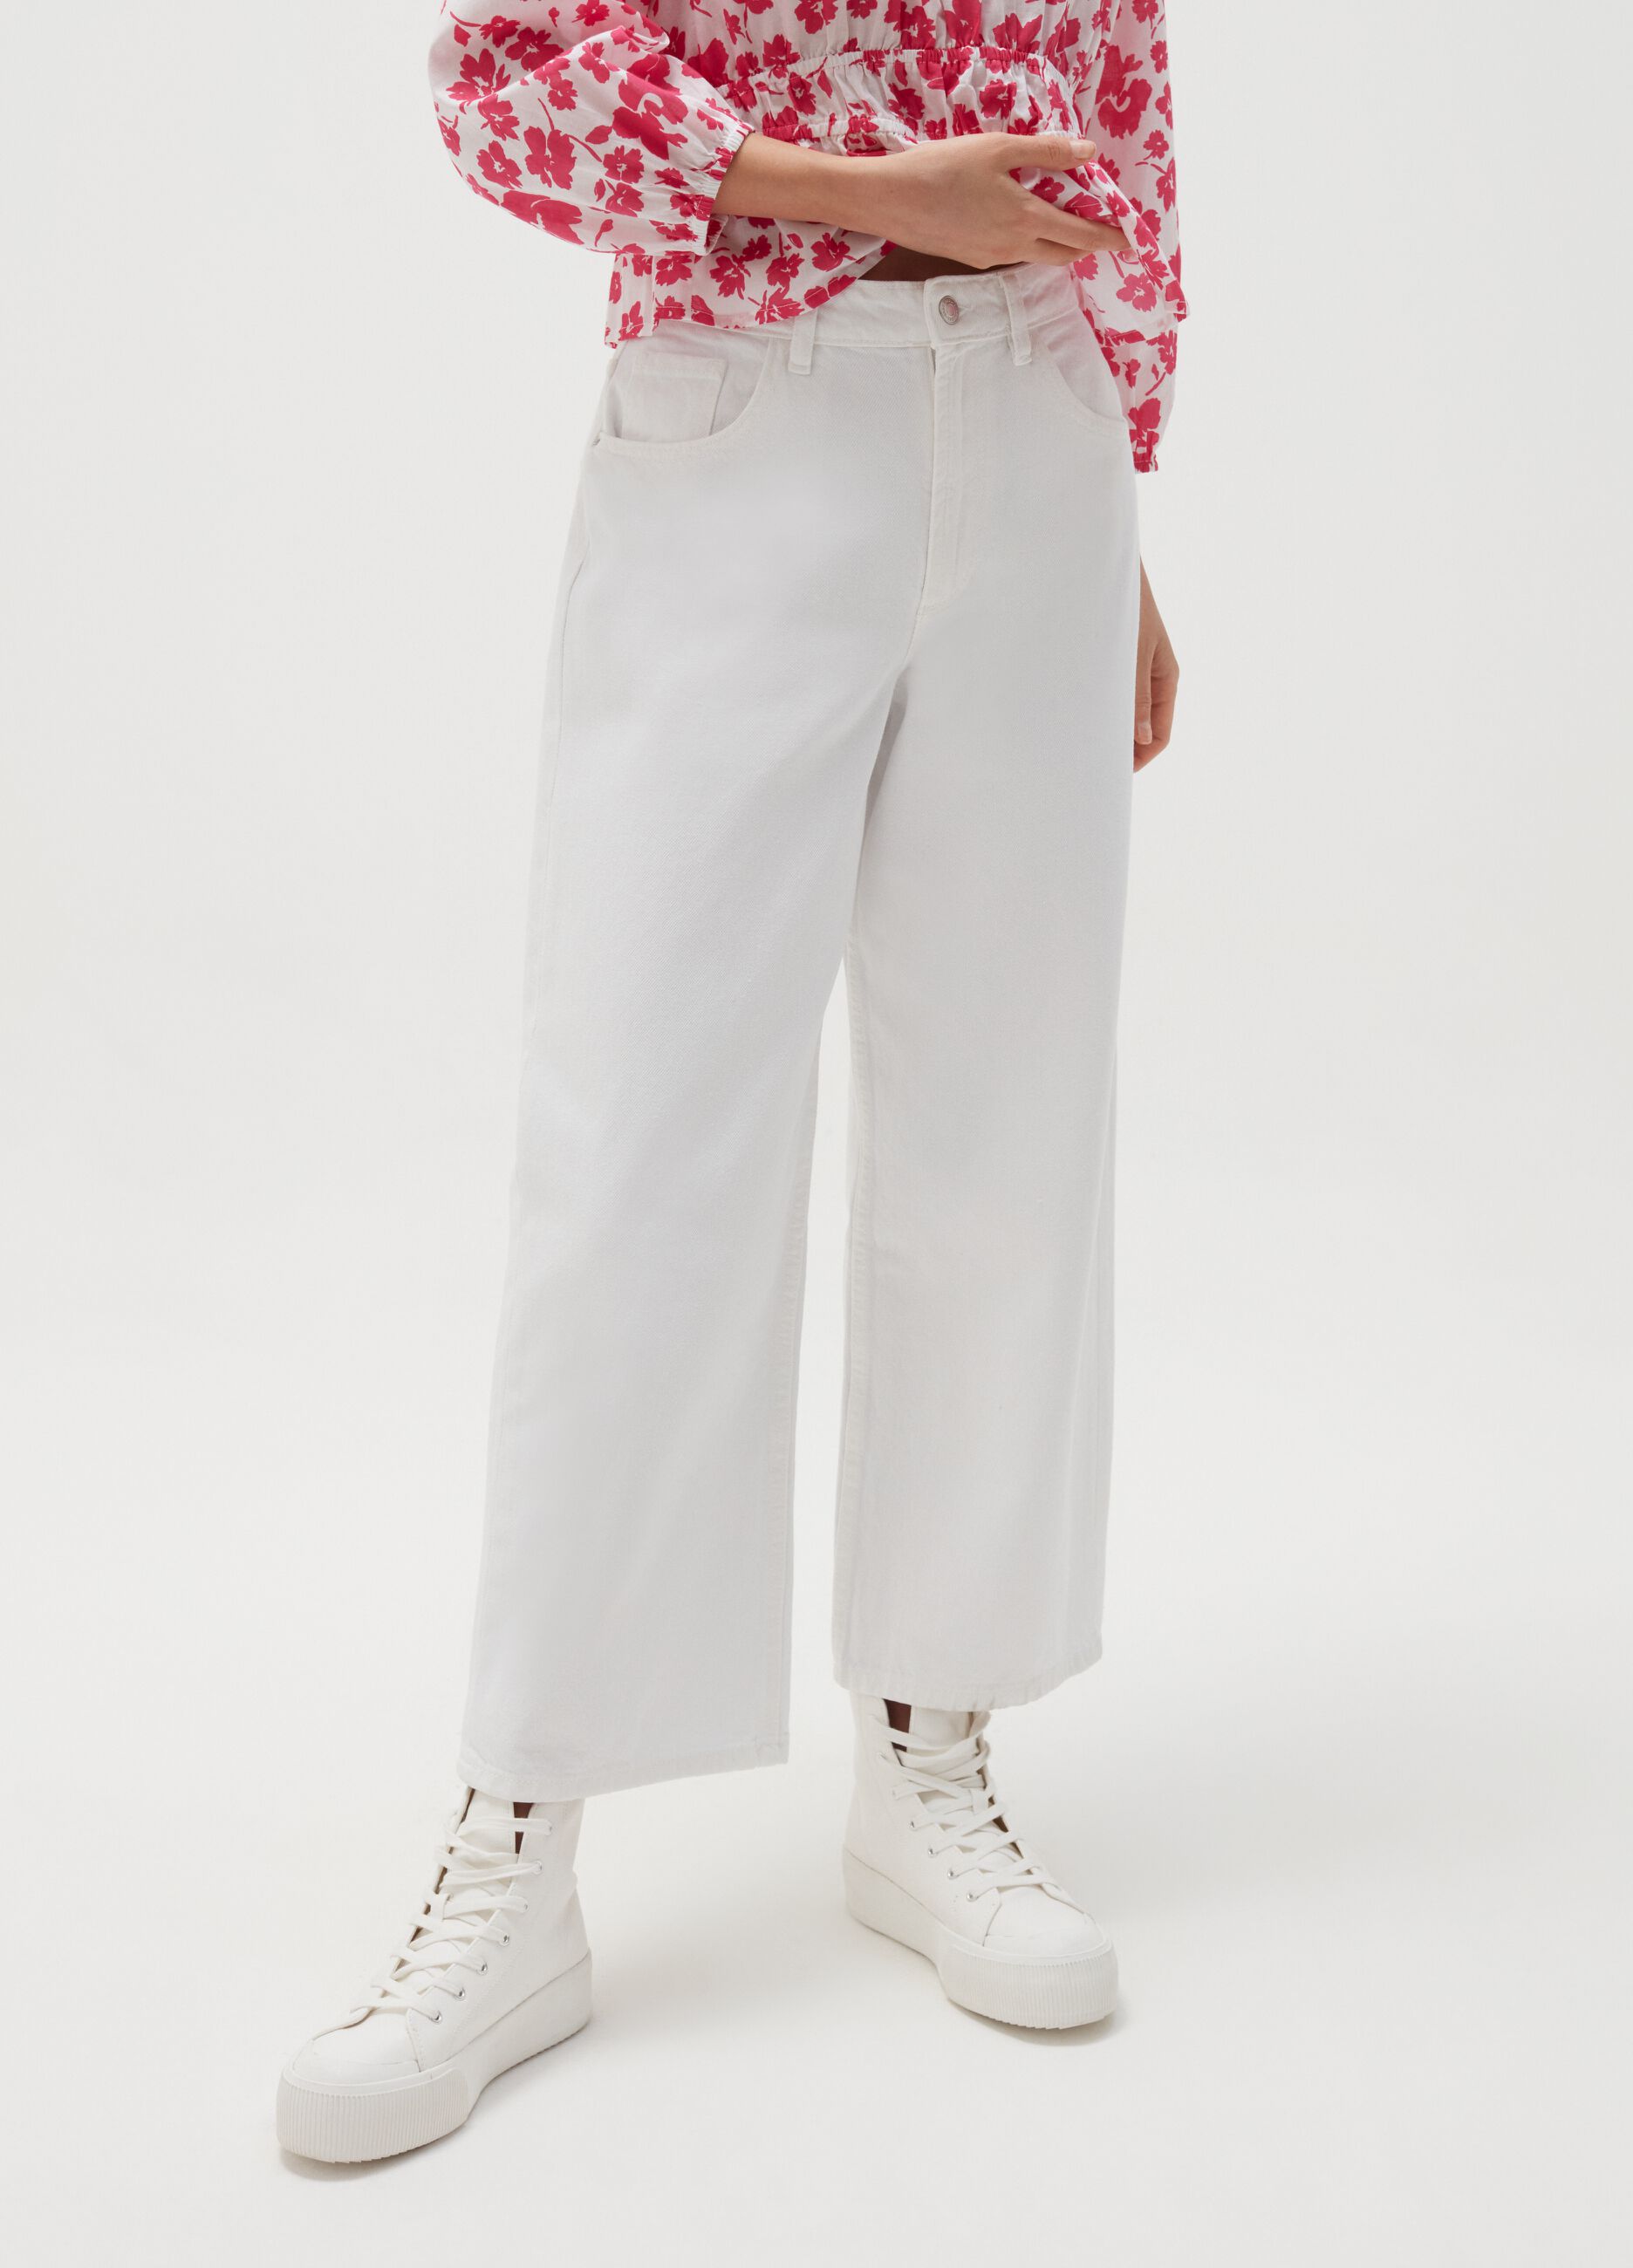 Baby Angel culotte jeans